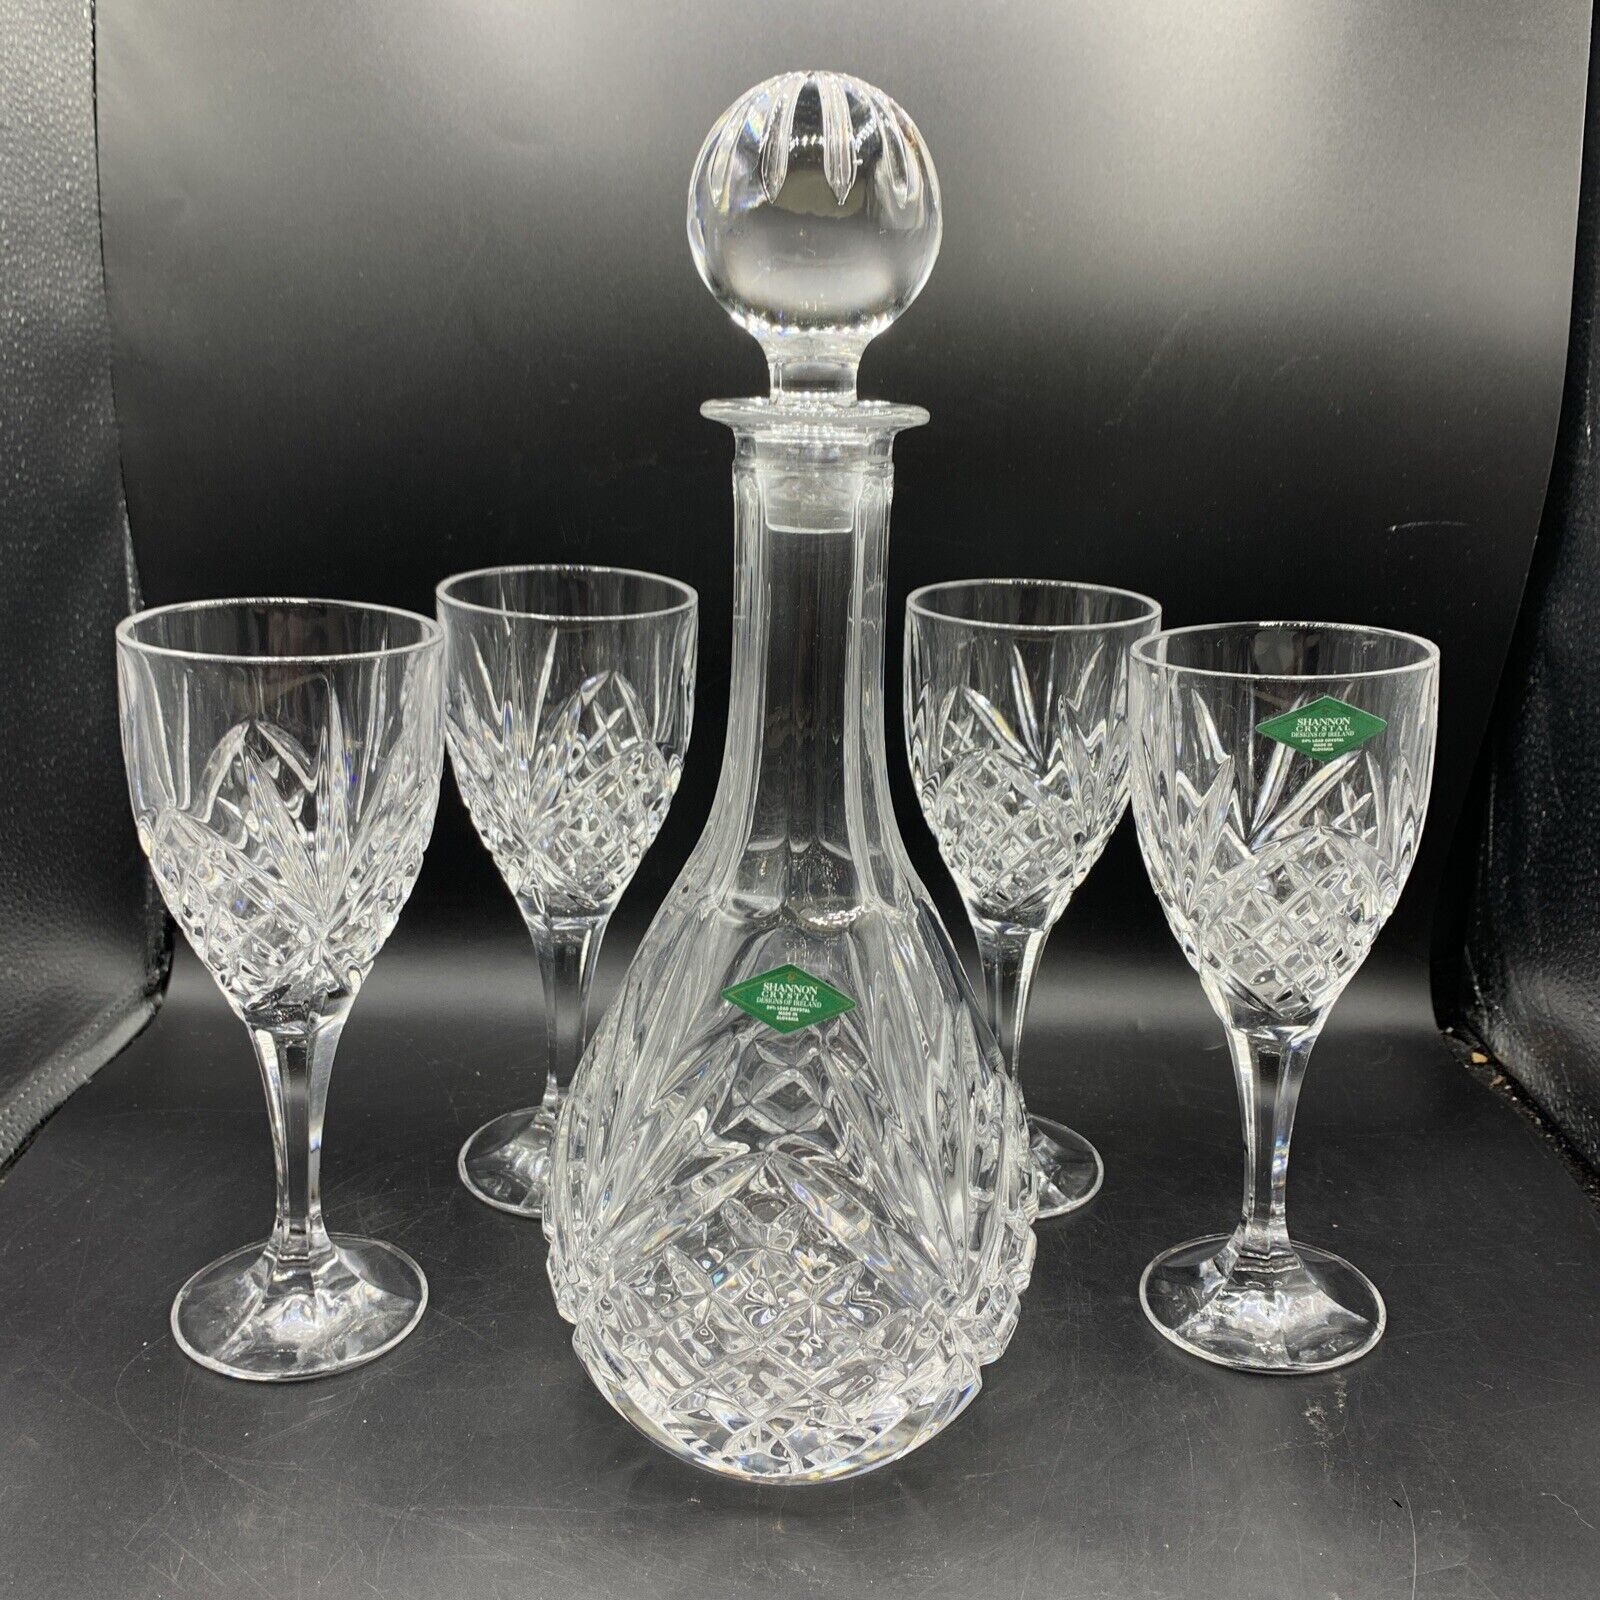 VintagE NOS Set of Decanter with Glass Stopper and 4 Goblets by SHANNON CRYSTAL